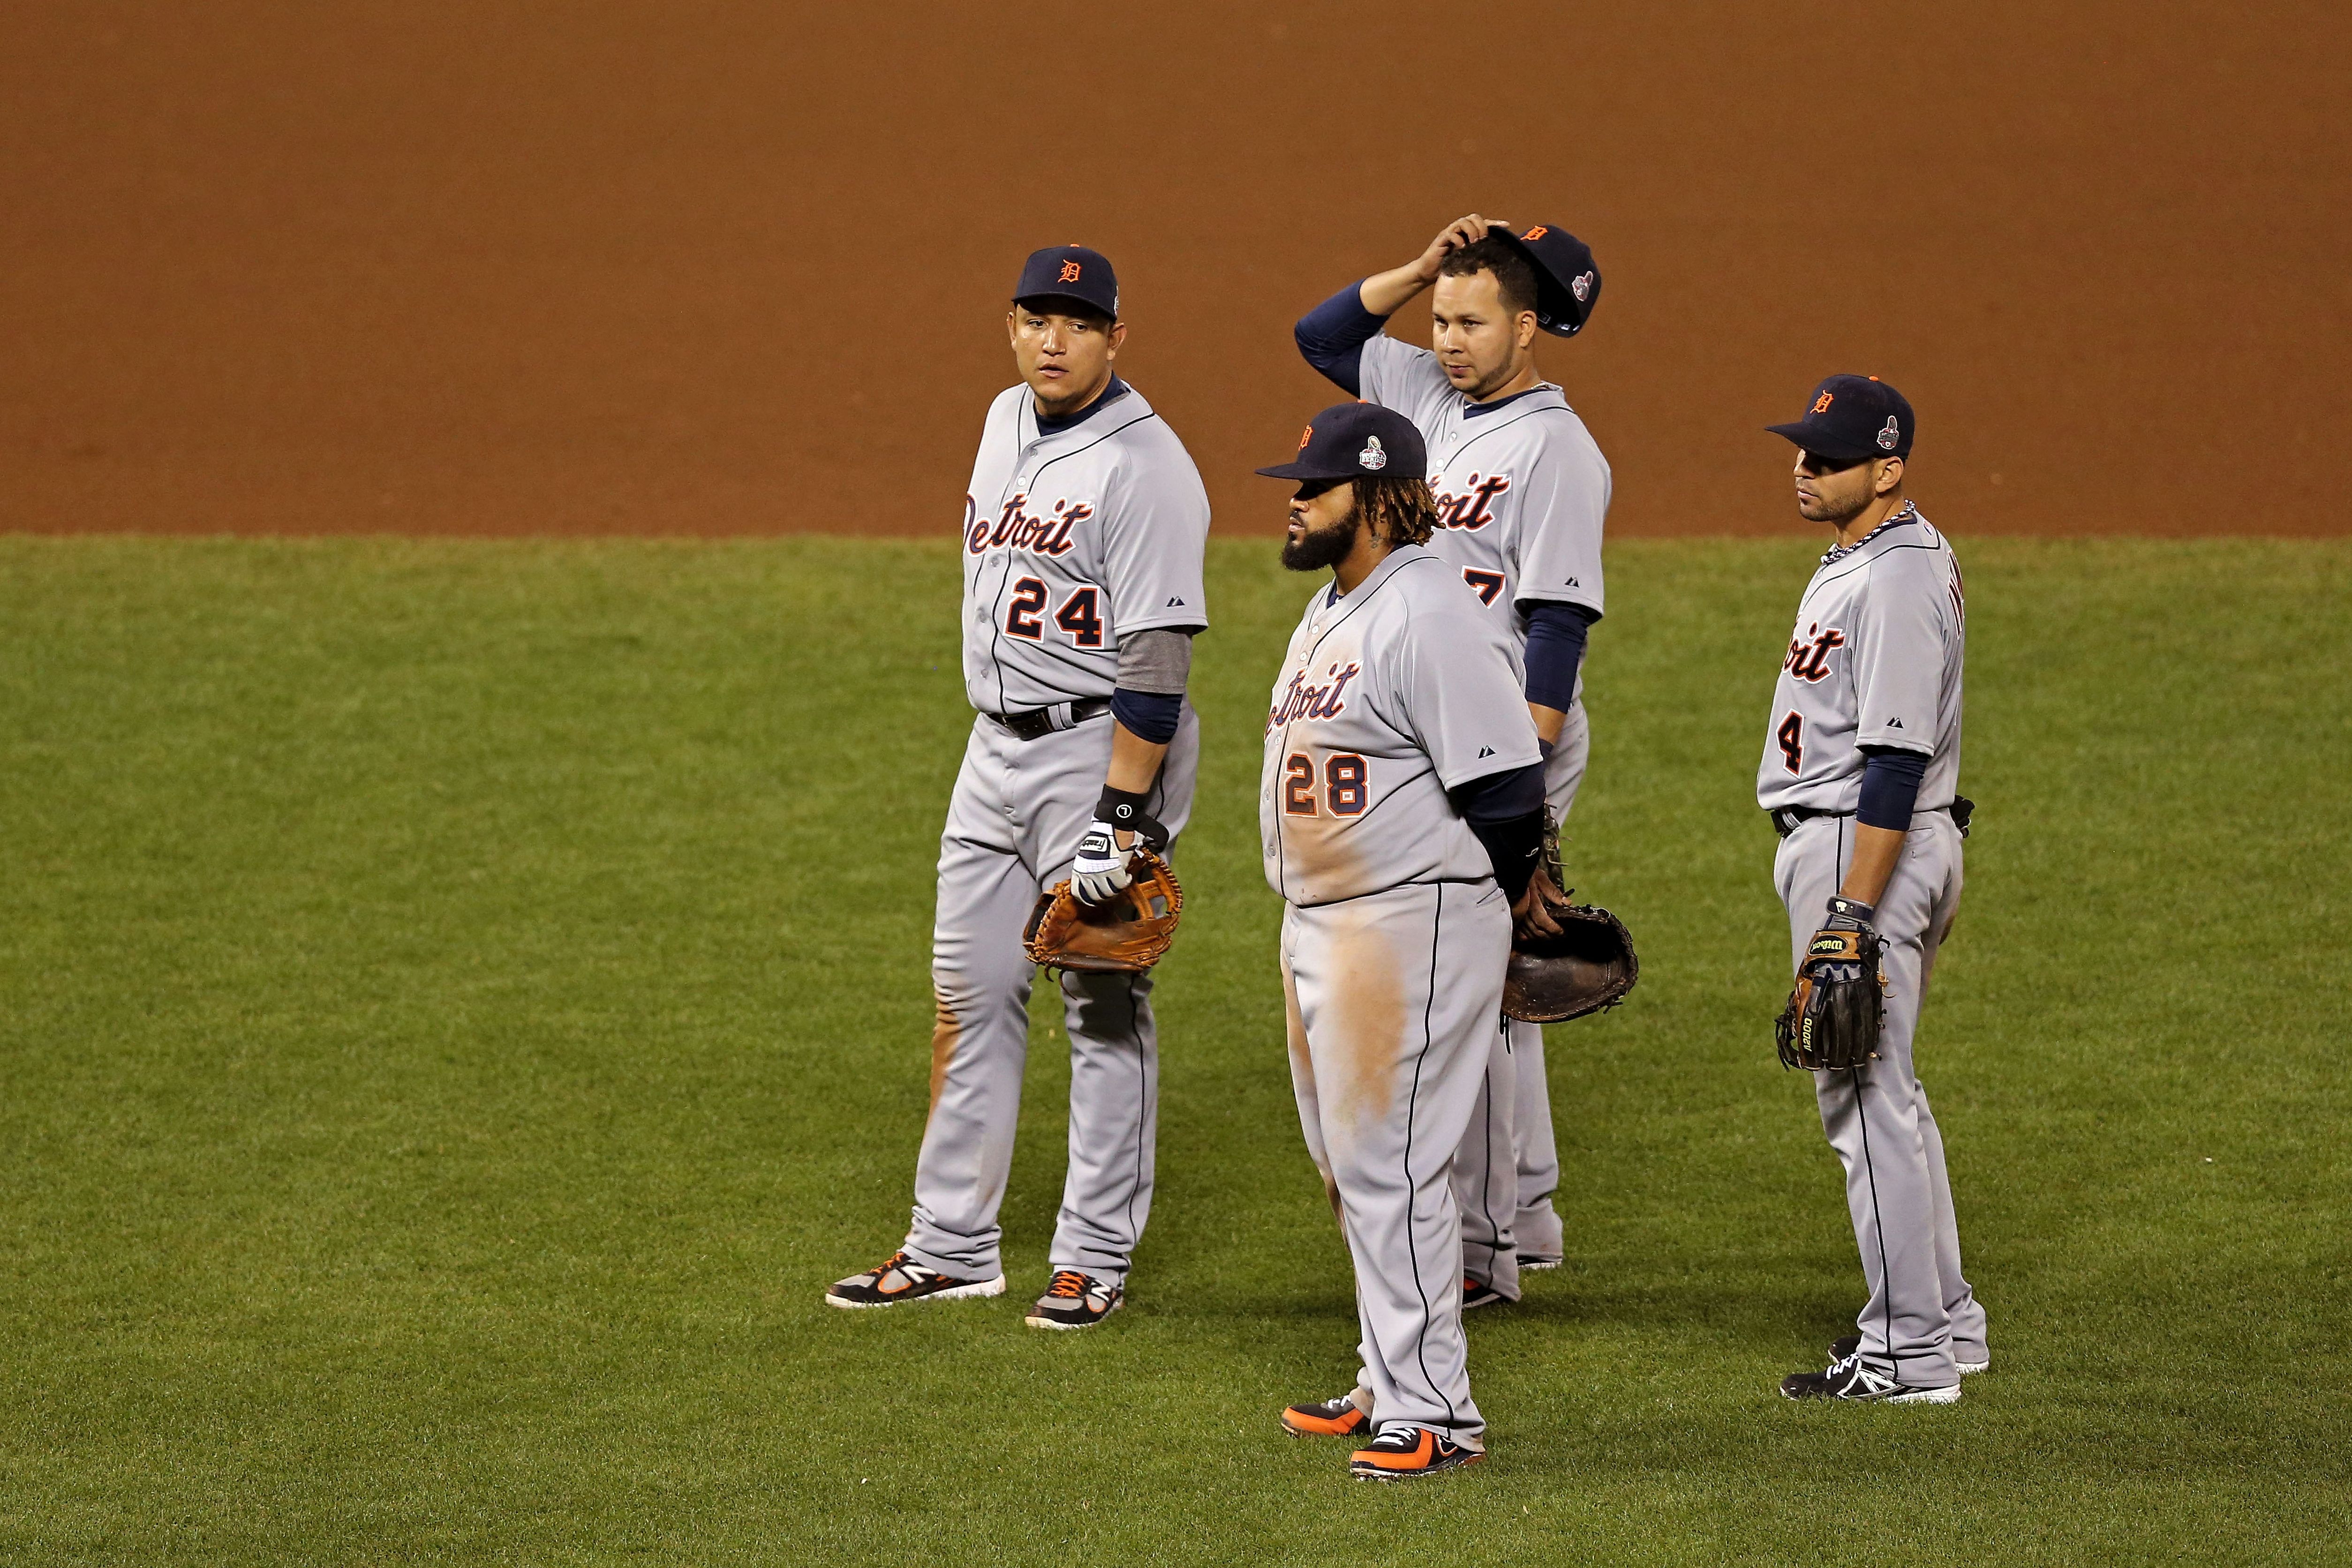 Shutouts show Tigers are out of place in World Series